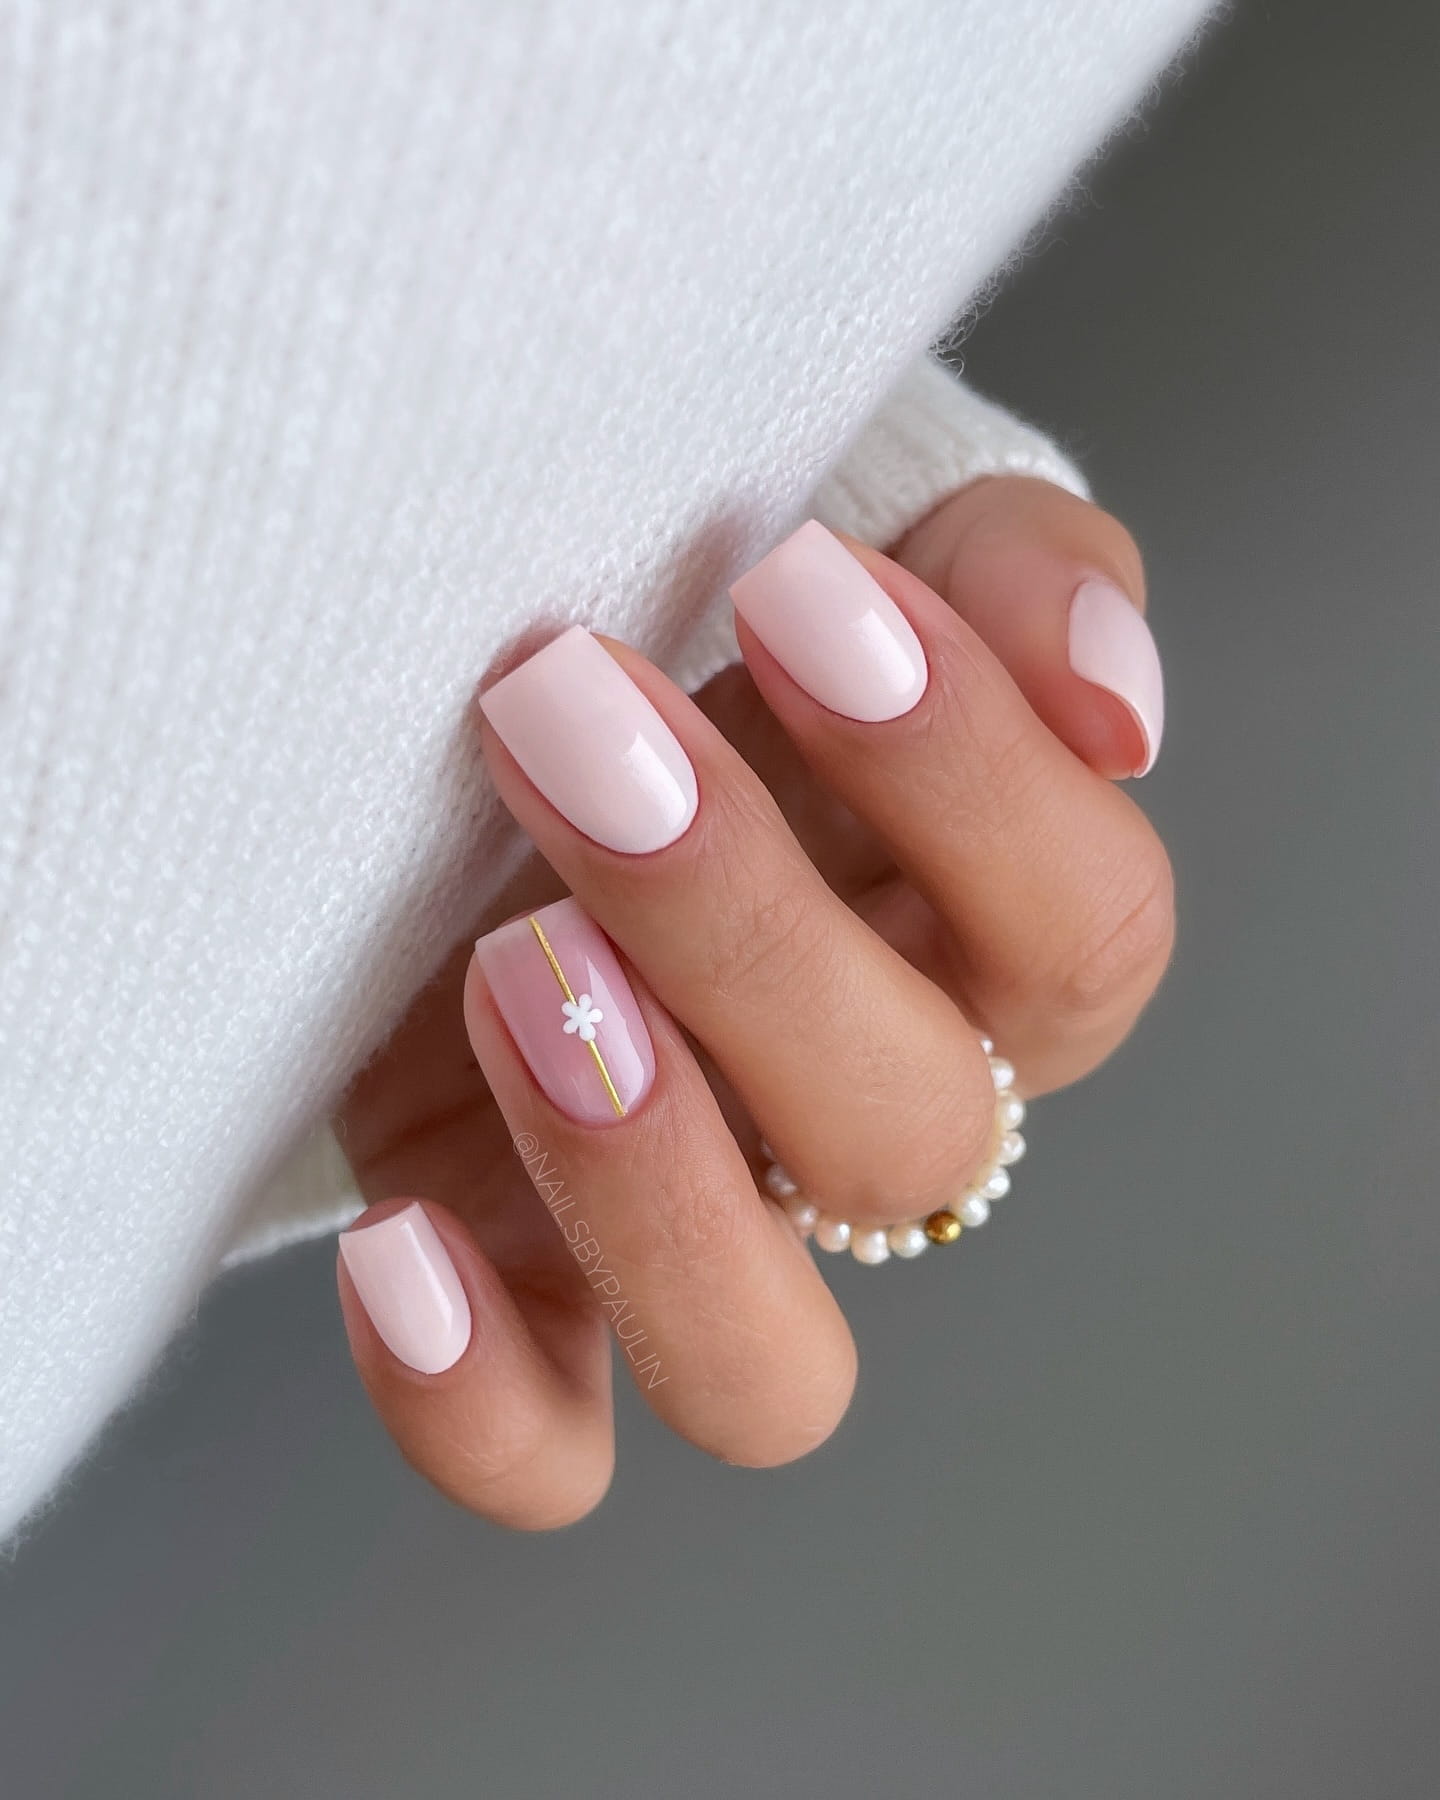 100+ Short Nail Designs You’ll Want To Try This Year images 5